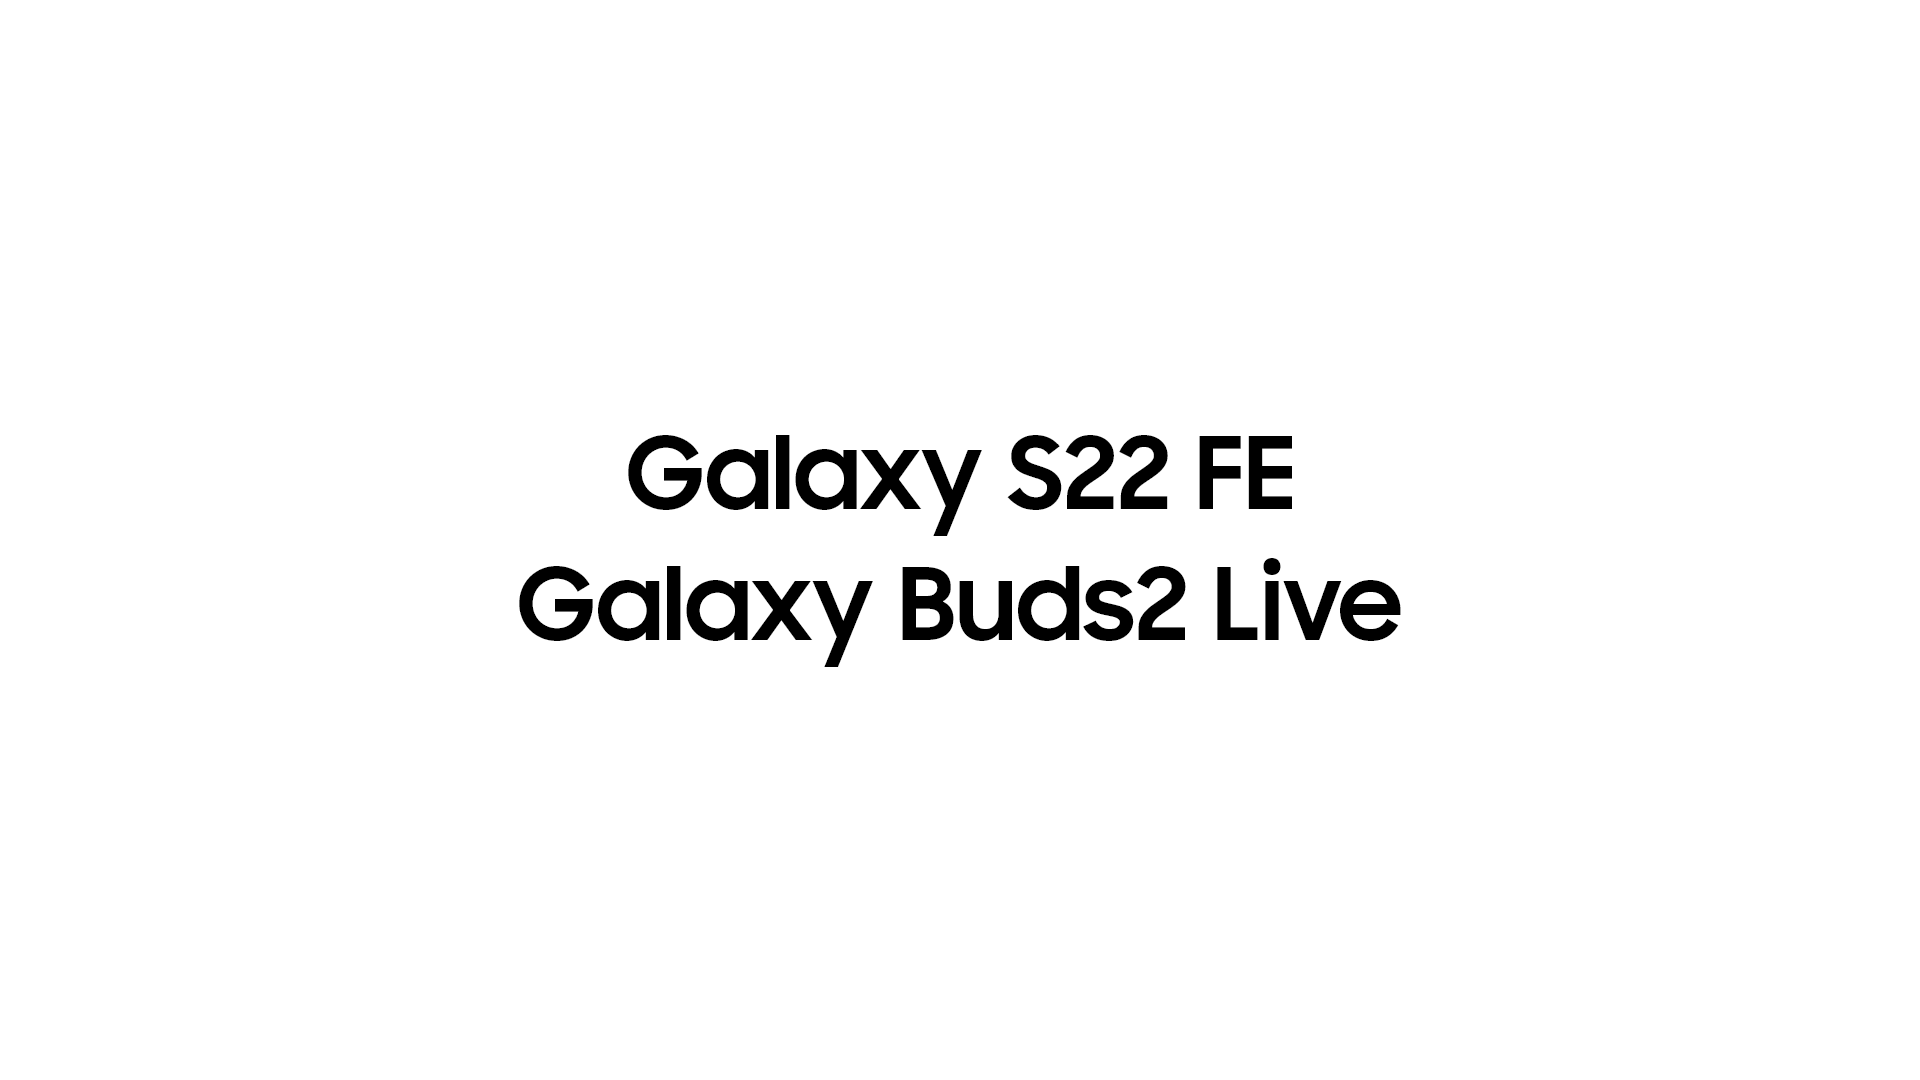 New Galaxy Buds Live are expected to join the alleged Galaxy S22 FE at the launch event this spring.  - Best-kept Samsung secret!  Cheaper flagship-grade phone than Galaxy S23 to steal the show soon?